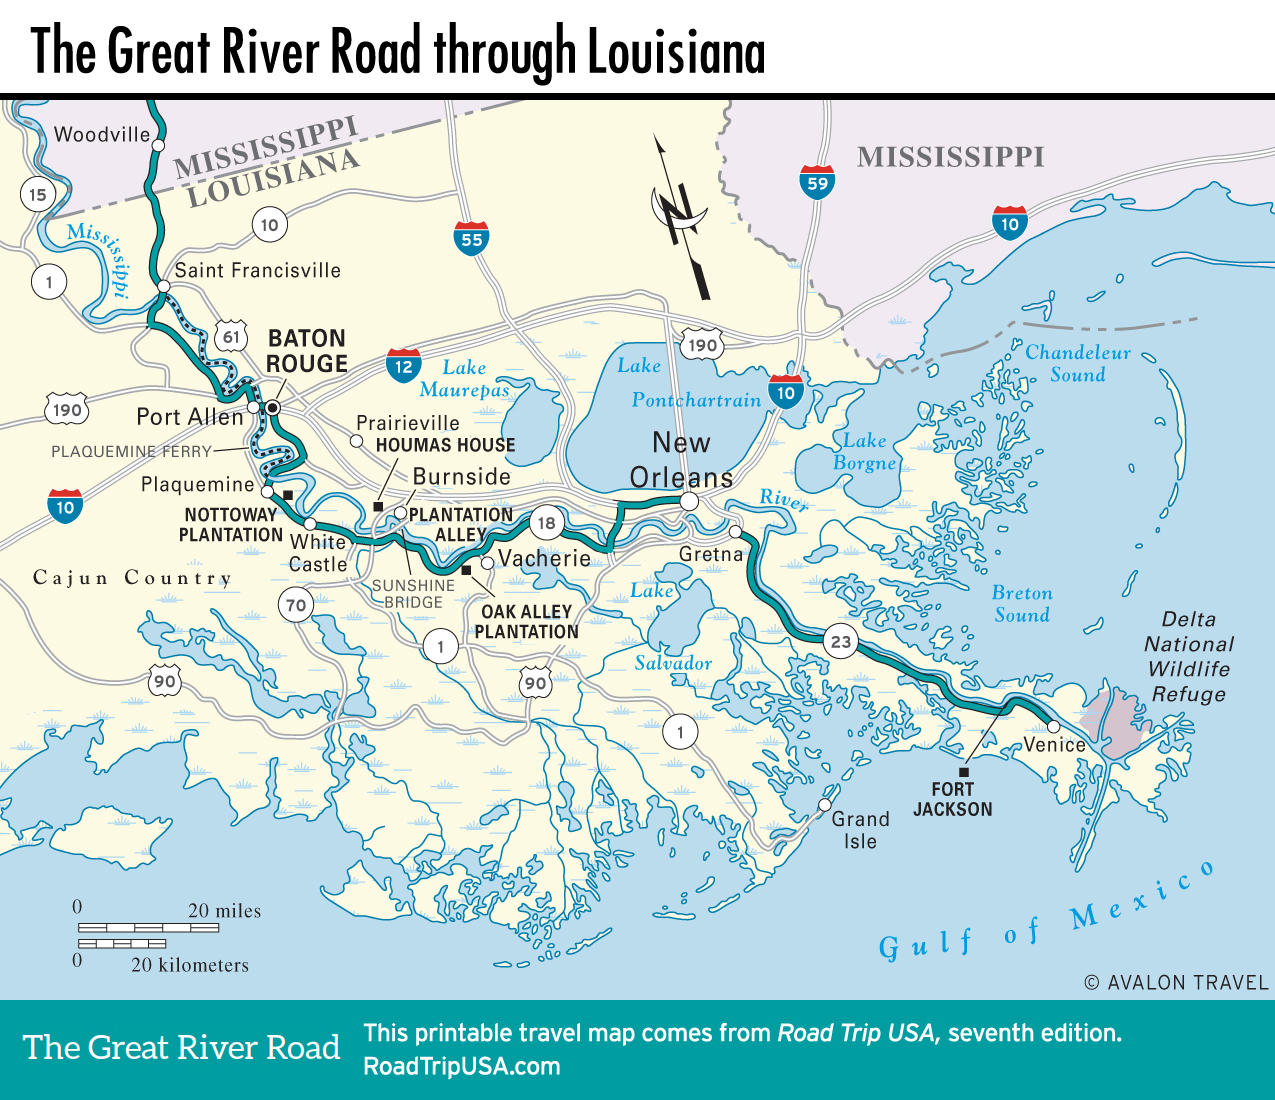 Louisiana Highlights on the Great River Road